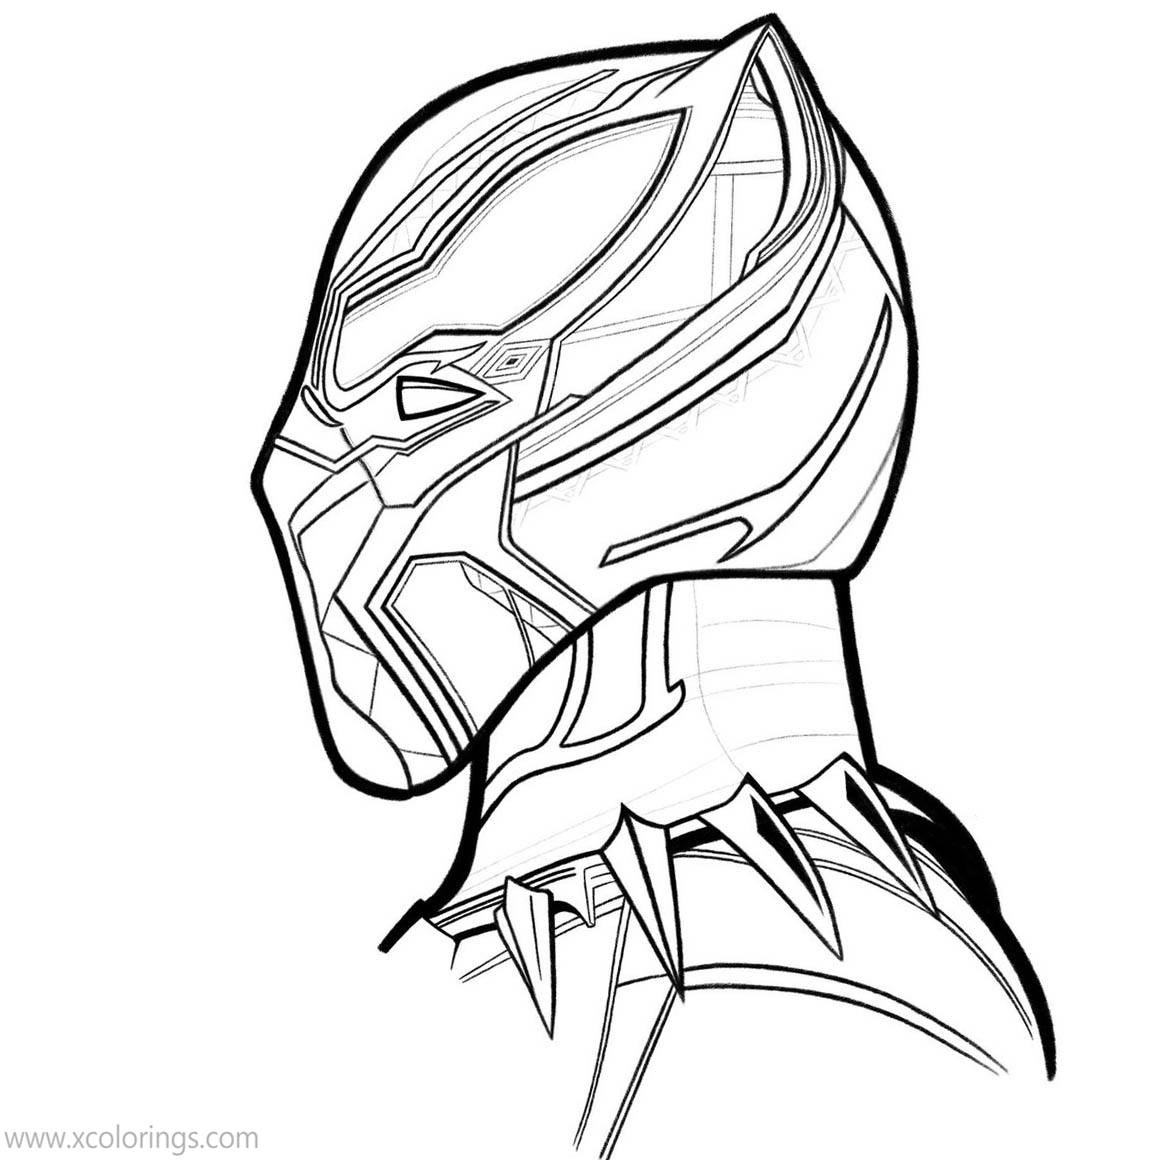 Black Panther Coloring Pages Jumping to Fight   XColorings.com